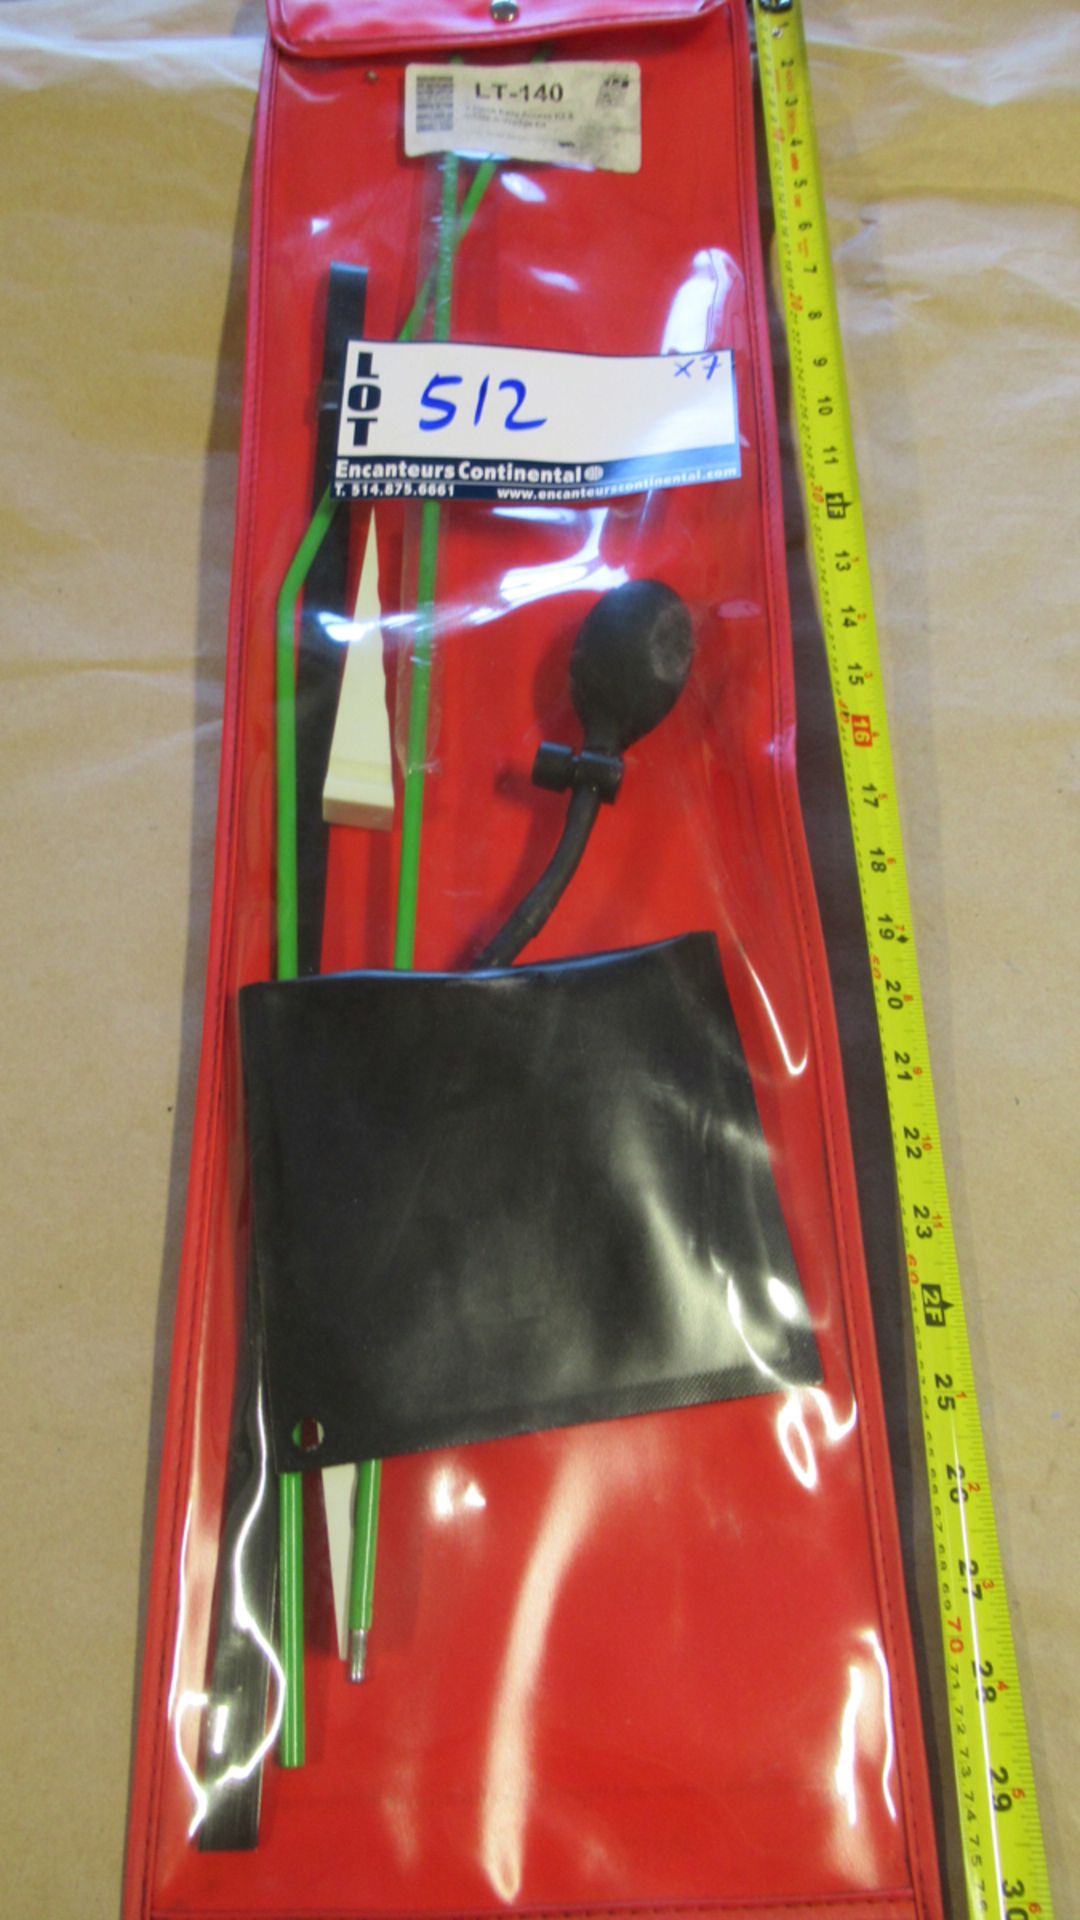 2 PC EASY ACCESS KIT & INFLATE-A-WEDGE KIT LT-140